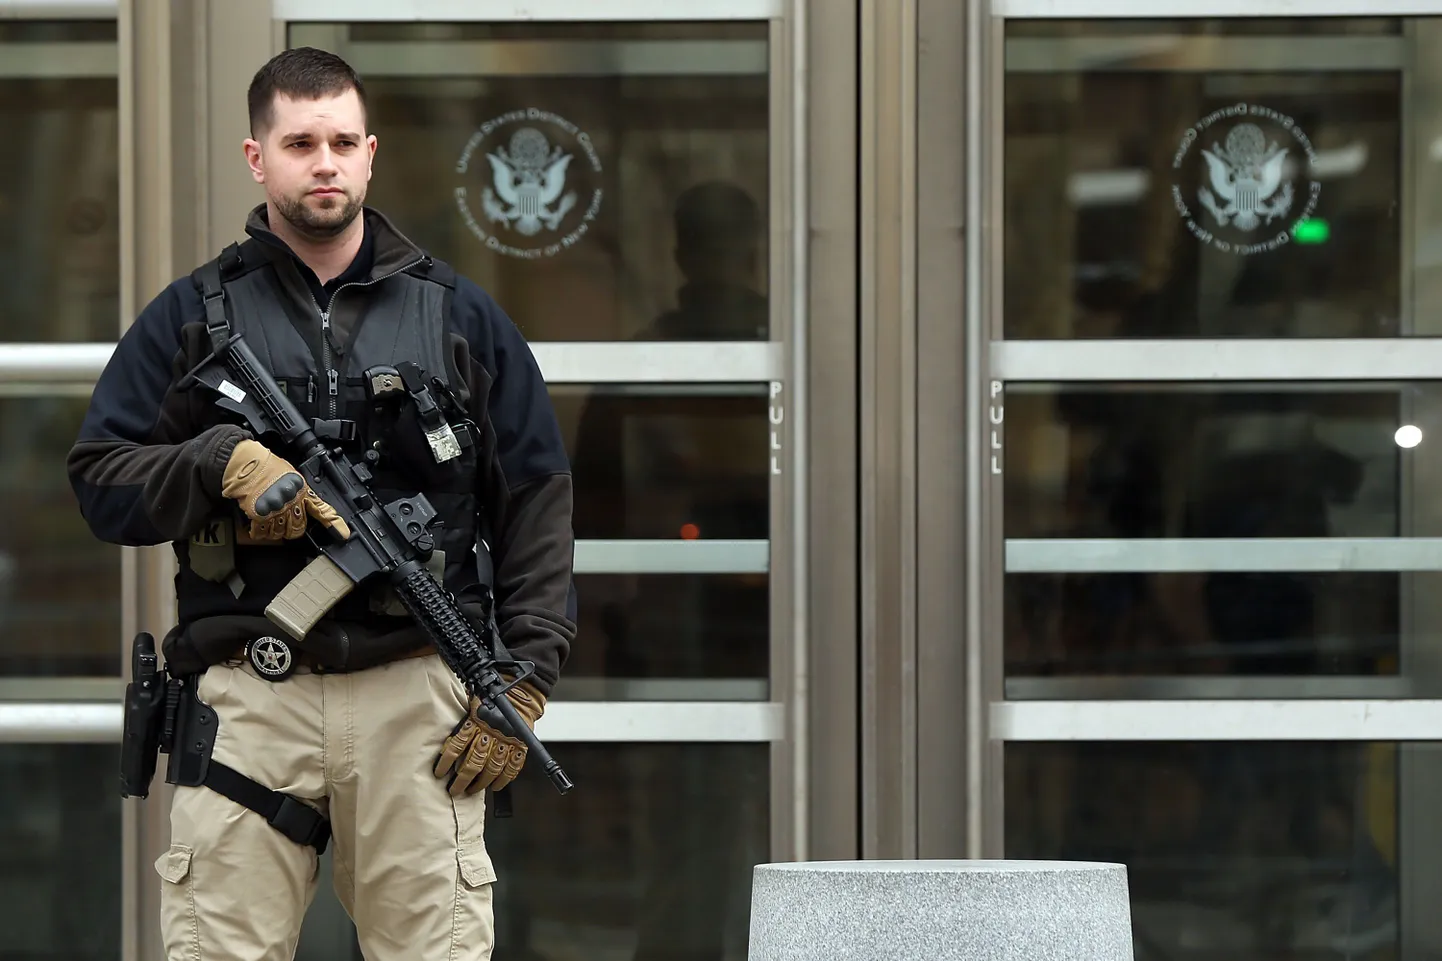 NEW YORK, NY - MARCH 18: An armed U.S. Marshal stands outside of a U.S. Federal court during the arraignment of Tairod Pugh, a former U.S. Air Force mechanic accused of attempting to join the terrorist organization ISIS, on March 18, 2015 in New York City. Pugh, 47 plead not guilty to charges of trying to enter Syria to join ISIS.   Spencer Platt/Getty Images/AFP
== FOR NEWSPAPERS, INTERNET, TELCOS & TELEVISION USE ONLY ==